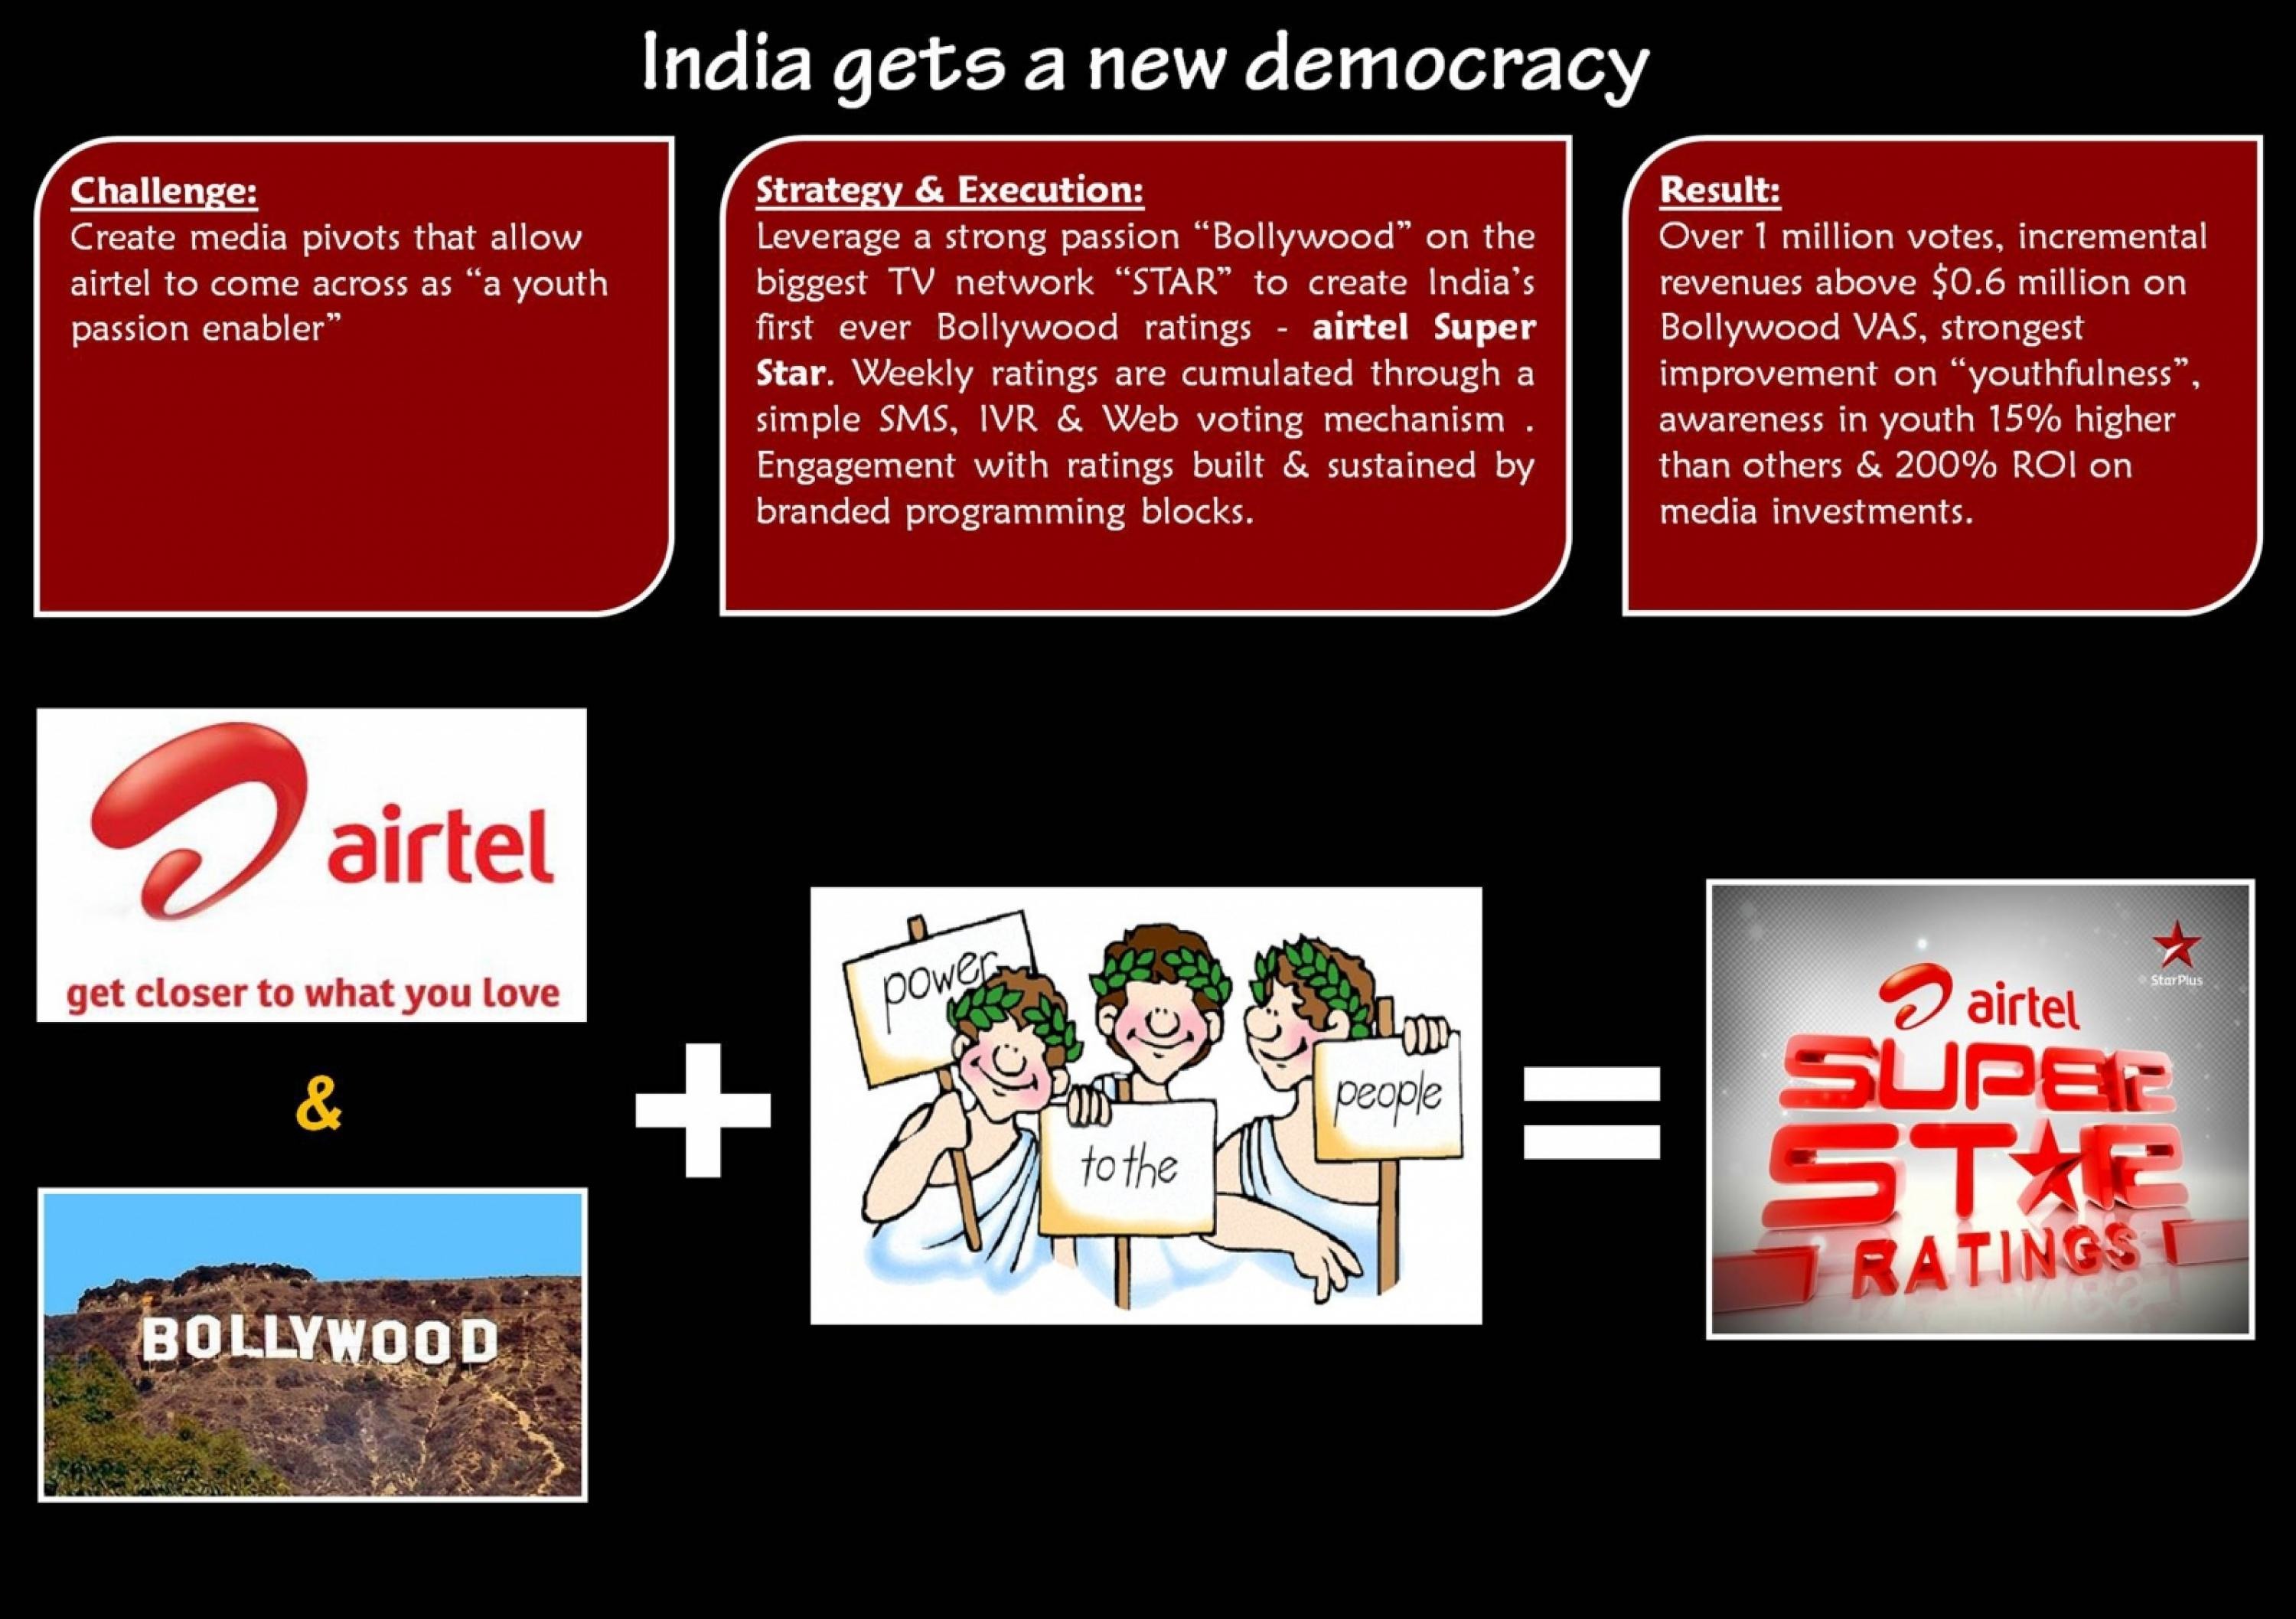 INDIA GETS A NEW DEMOCRACY